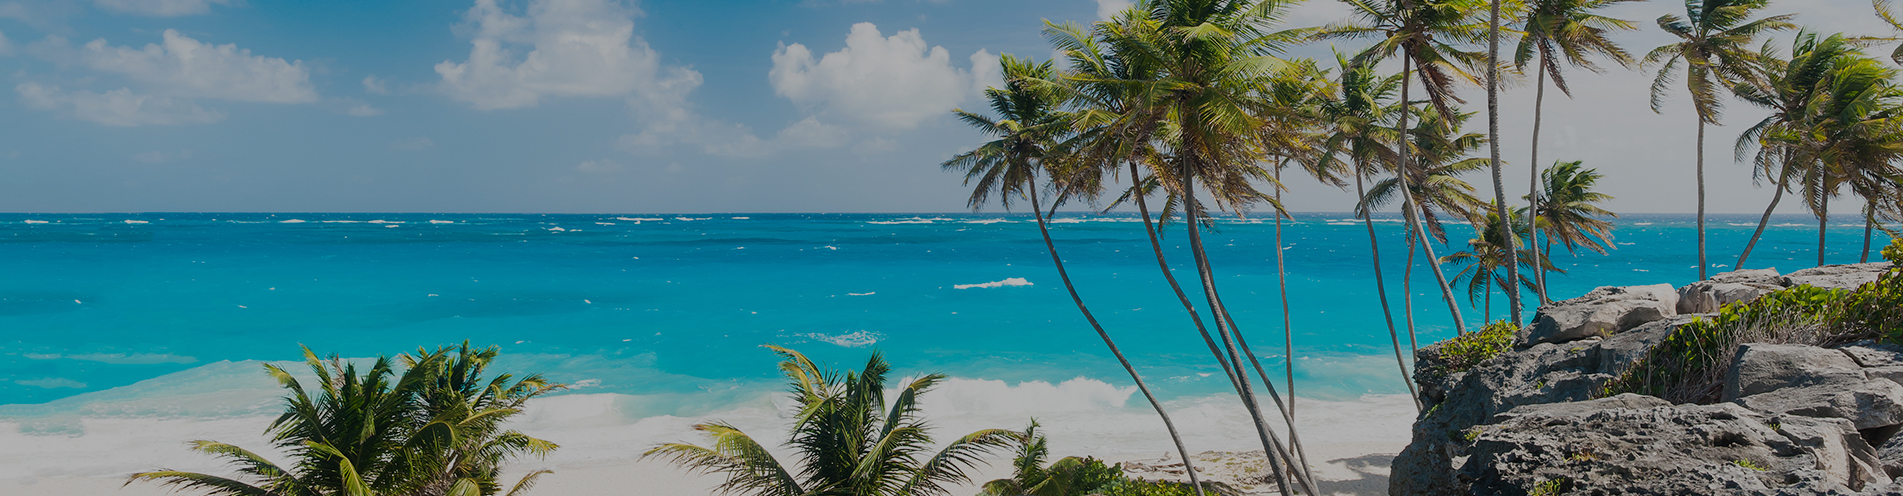 A beautiful, serene beach scene with palm trees and the Caribbean Sea in the background